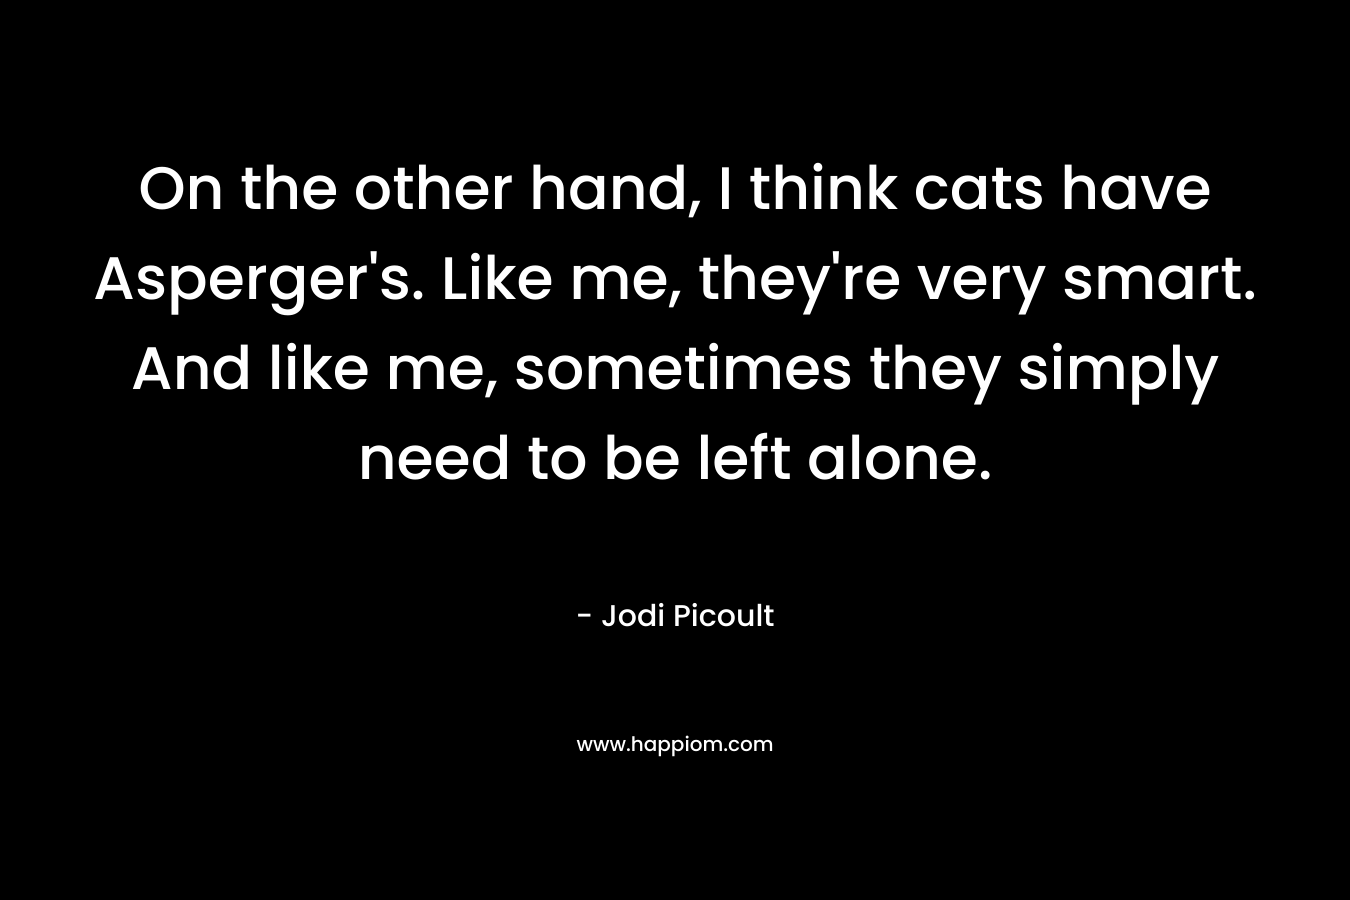 On the other hand, I think cats have Asperger's. Like me, they're very smart. And like me, sometimes they simply need to be left alone.